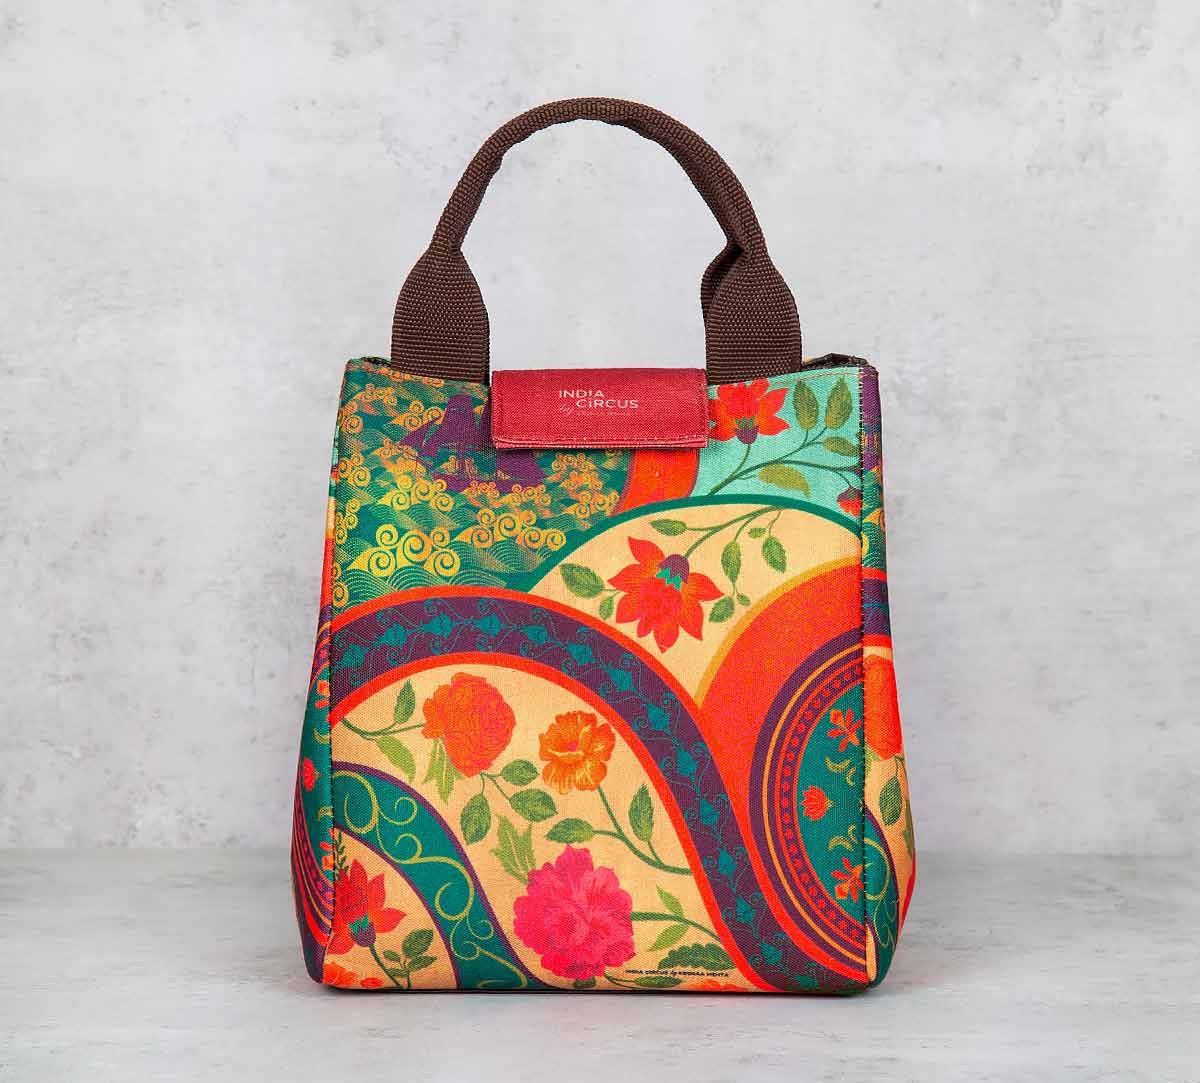 India Circus Floral Embroidery Lunch Bag